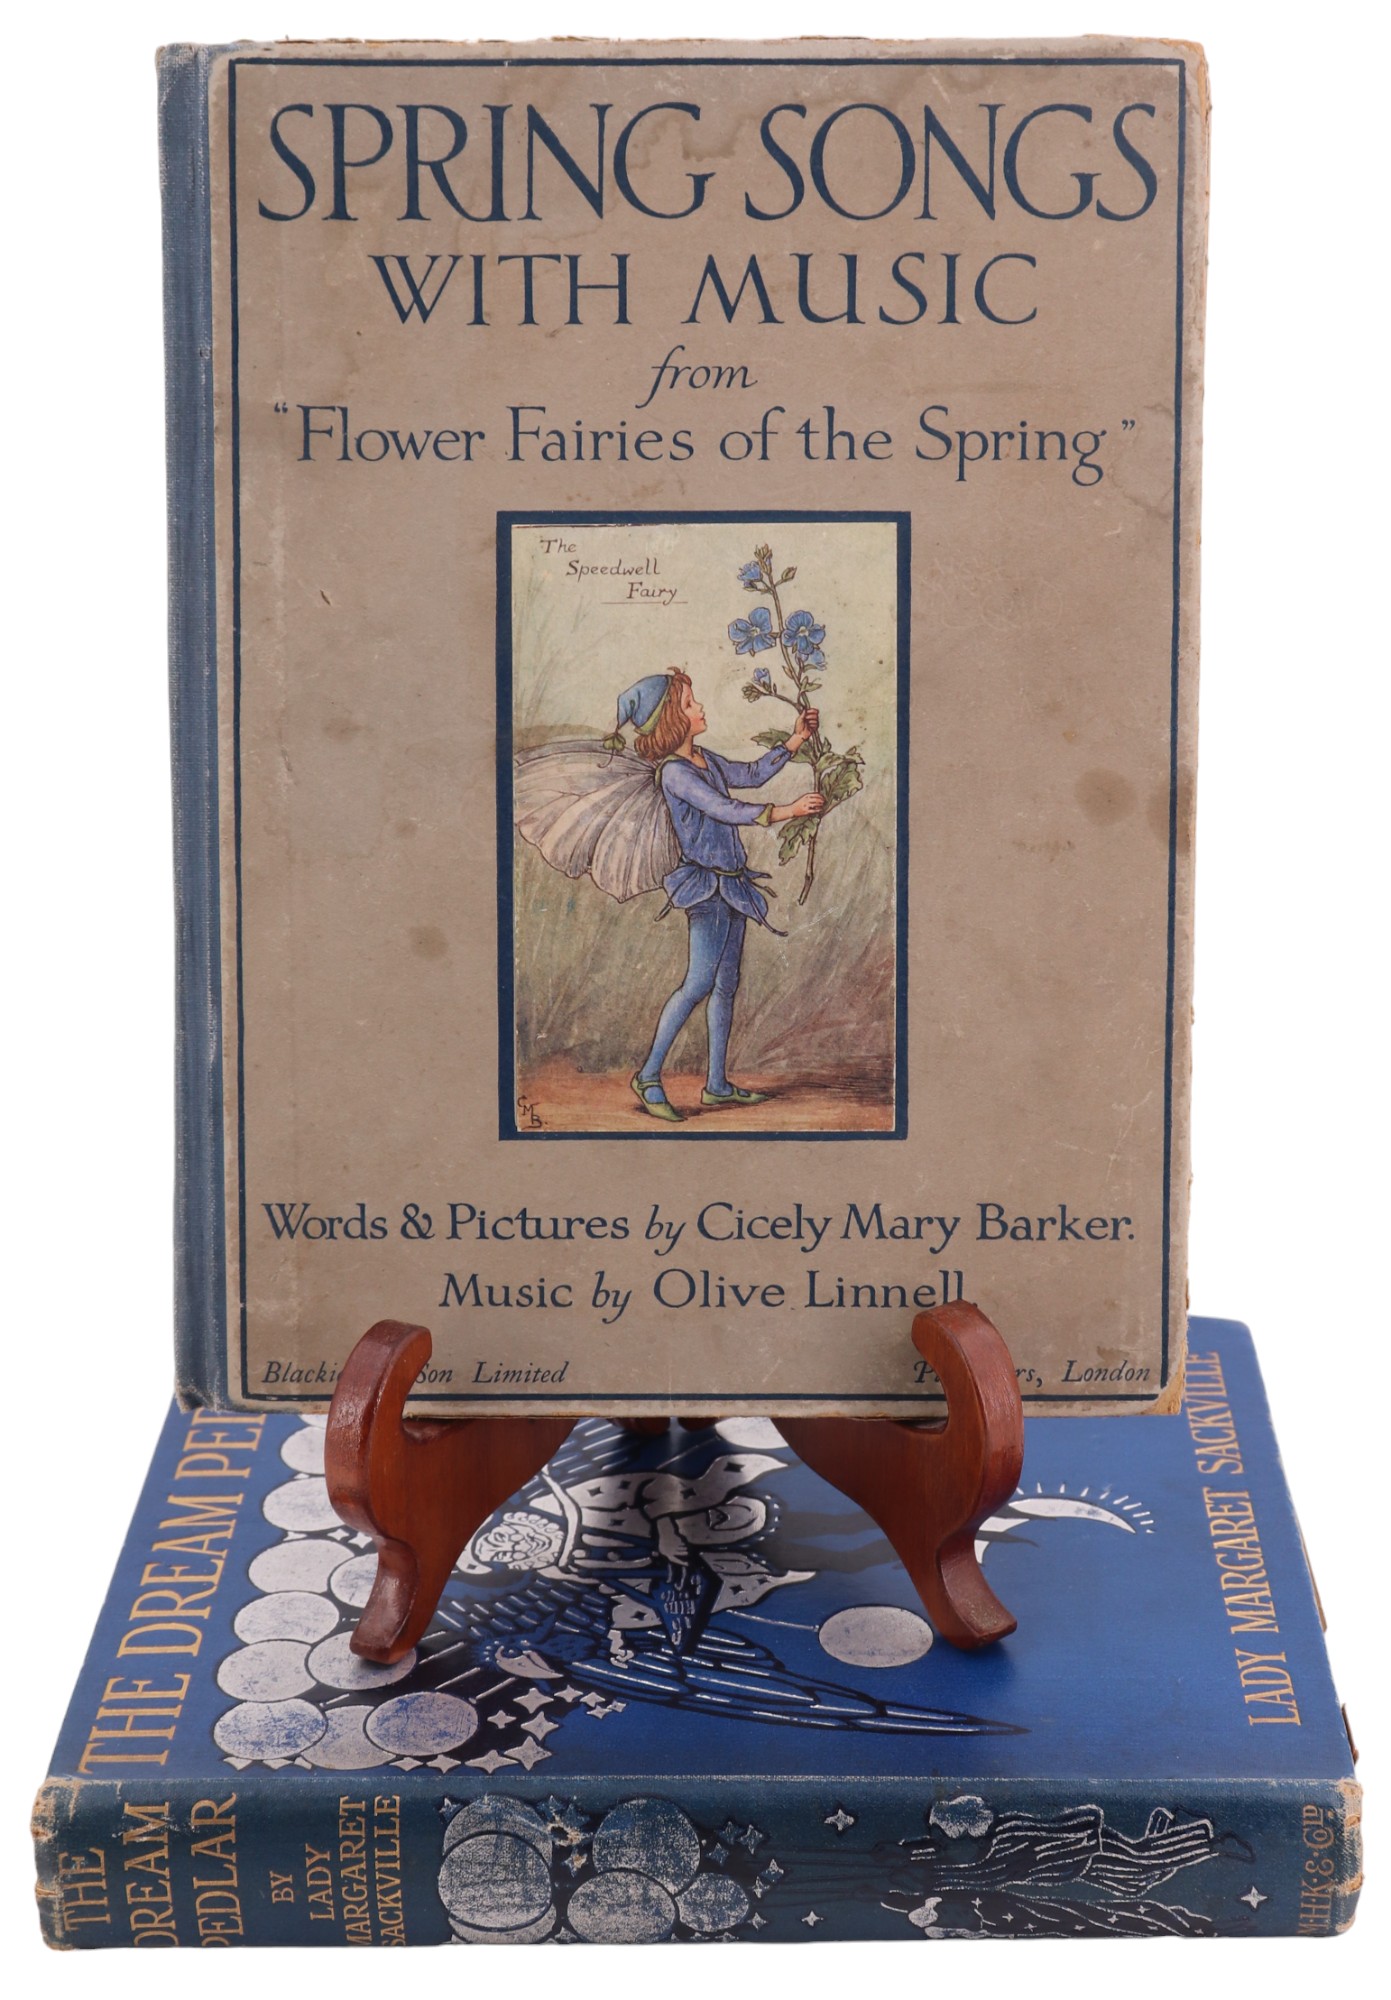 "Spring Songs With Music from Flower Fairies of the Spring", with Words and Pictures by Cicely